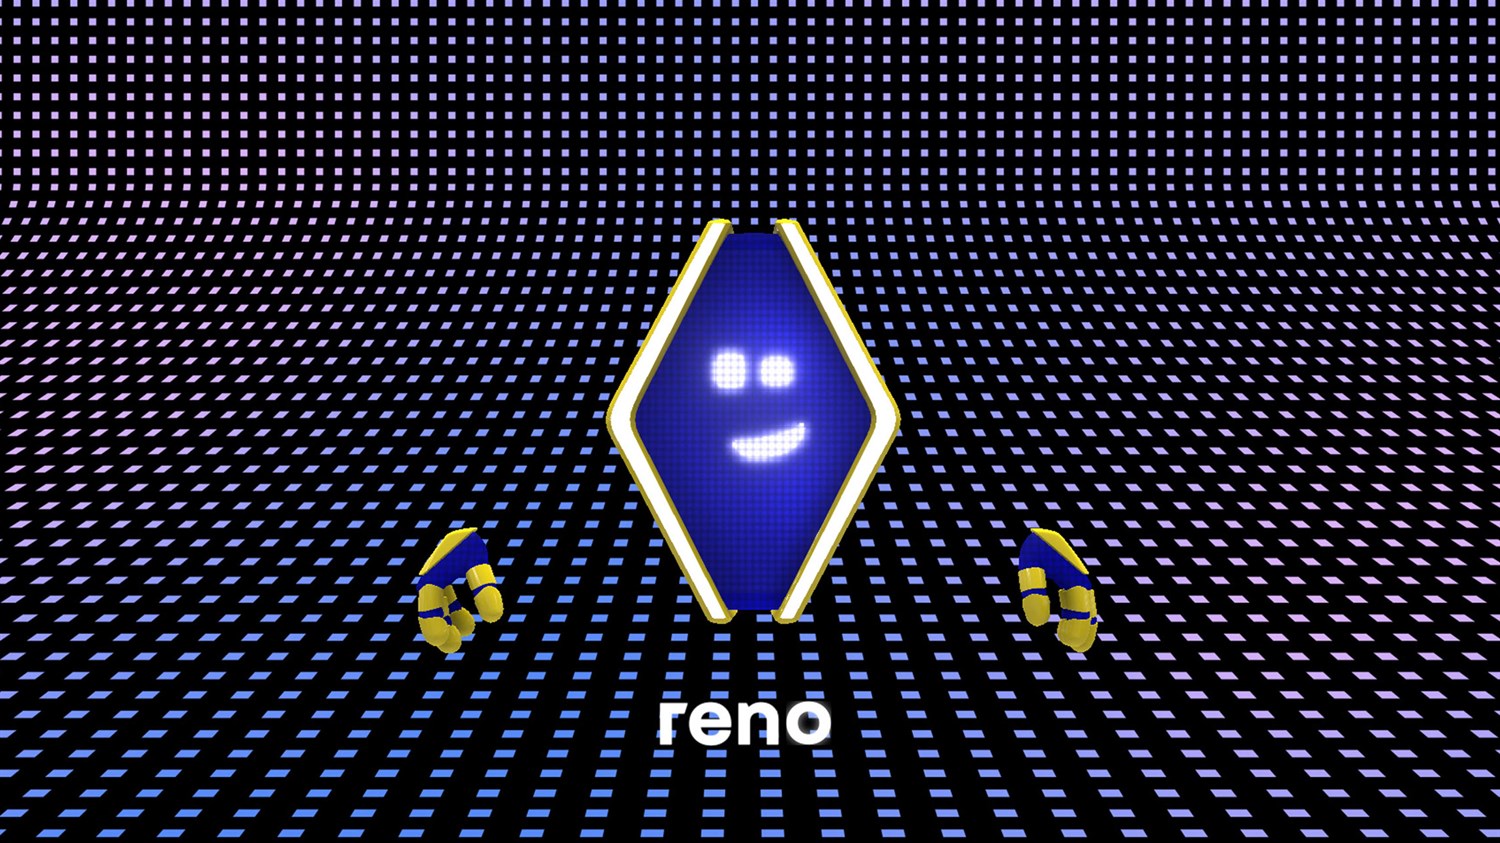 who am I? - reno official avatar - Renault